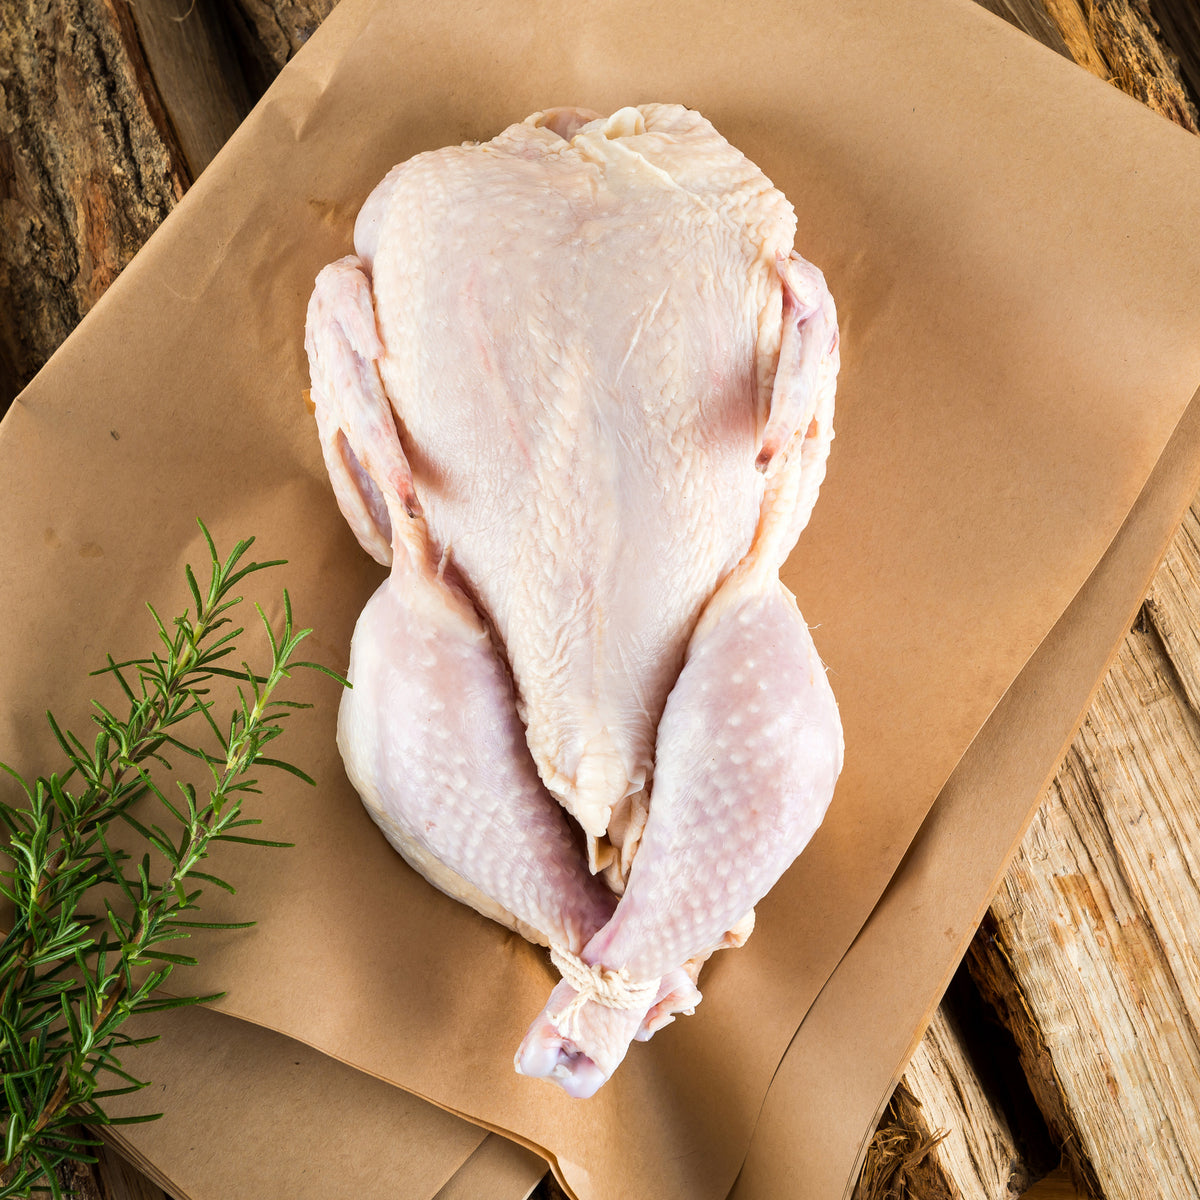 Certified Organic Free-Range Whole Chicken from New Zealand (1.3-1.9kg)